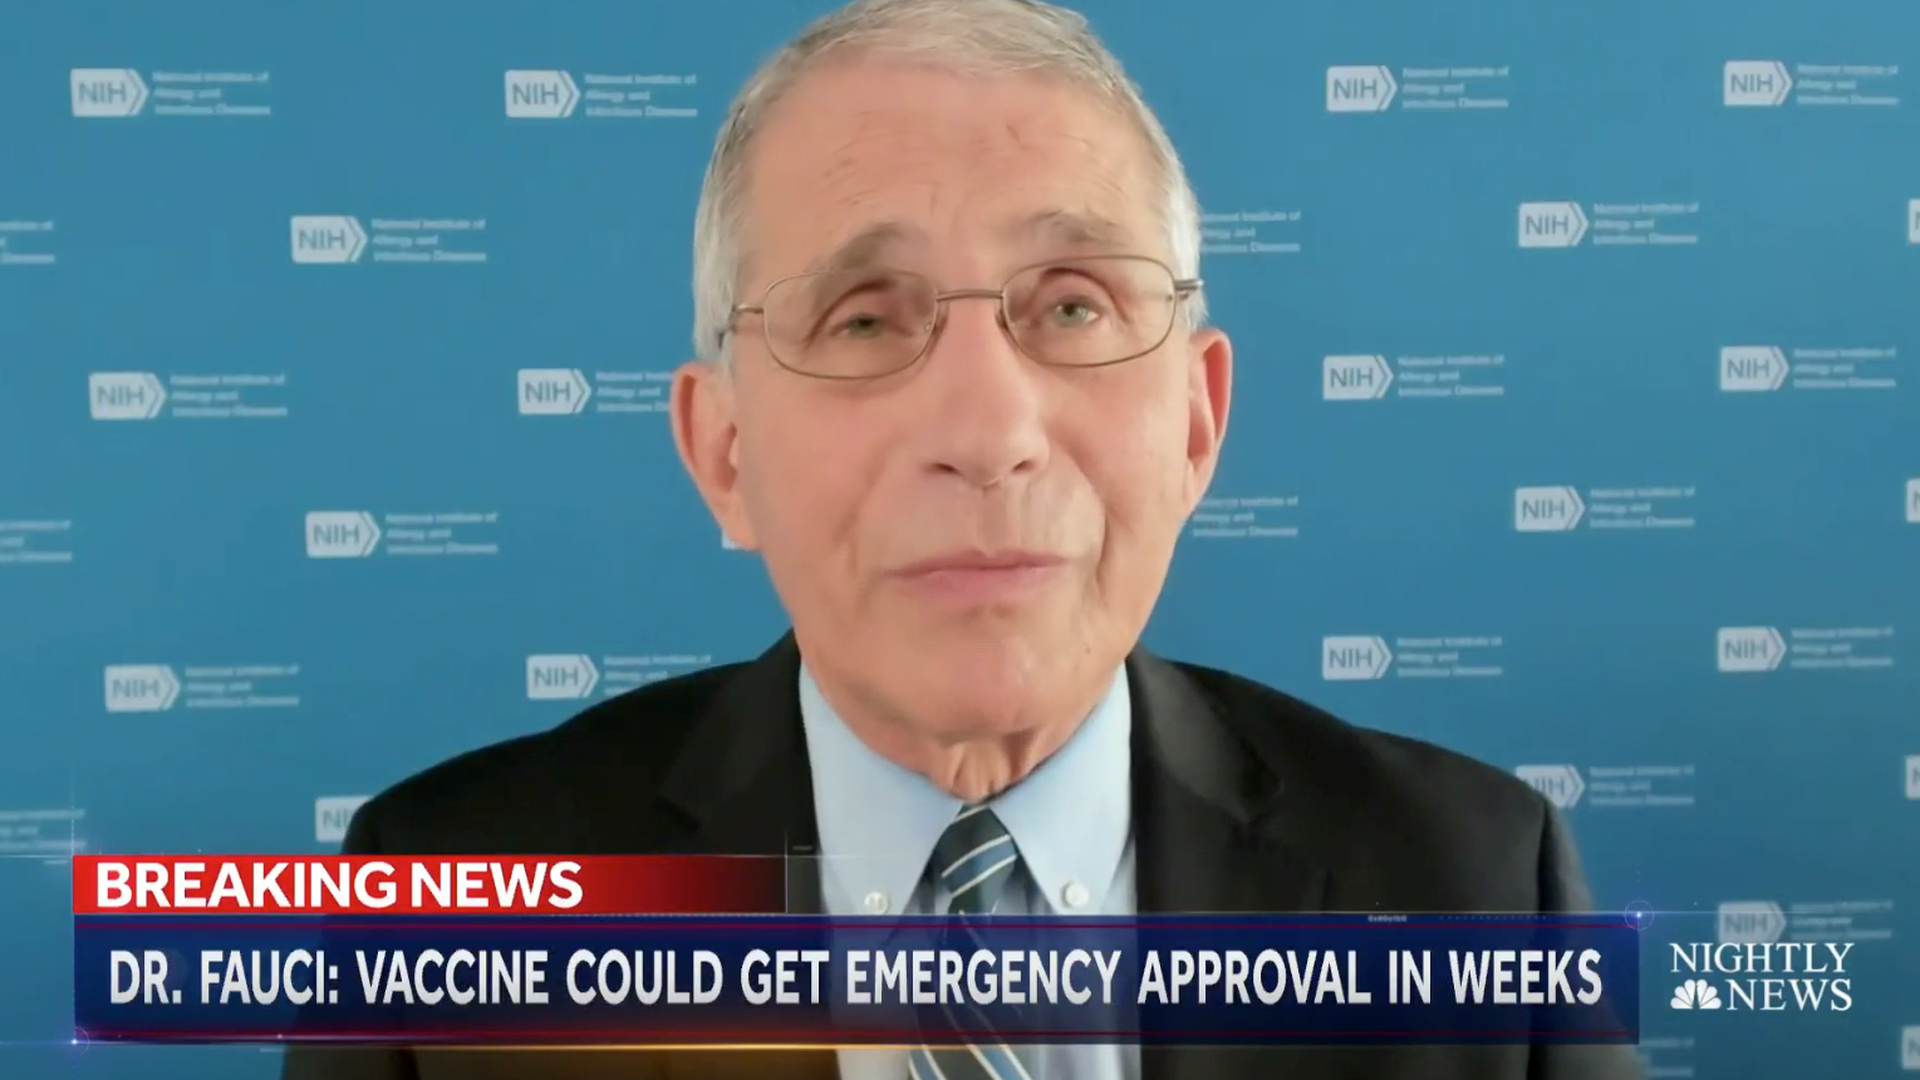 NIAID director Anthony Fauci on NBC's "Nightly News" on Tuesday